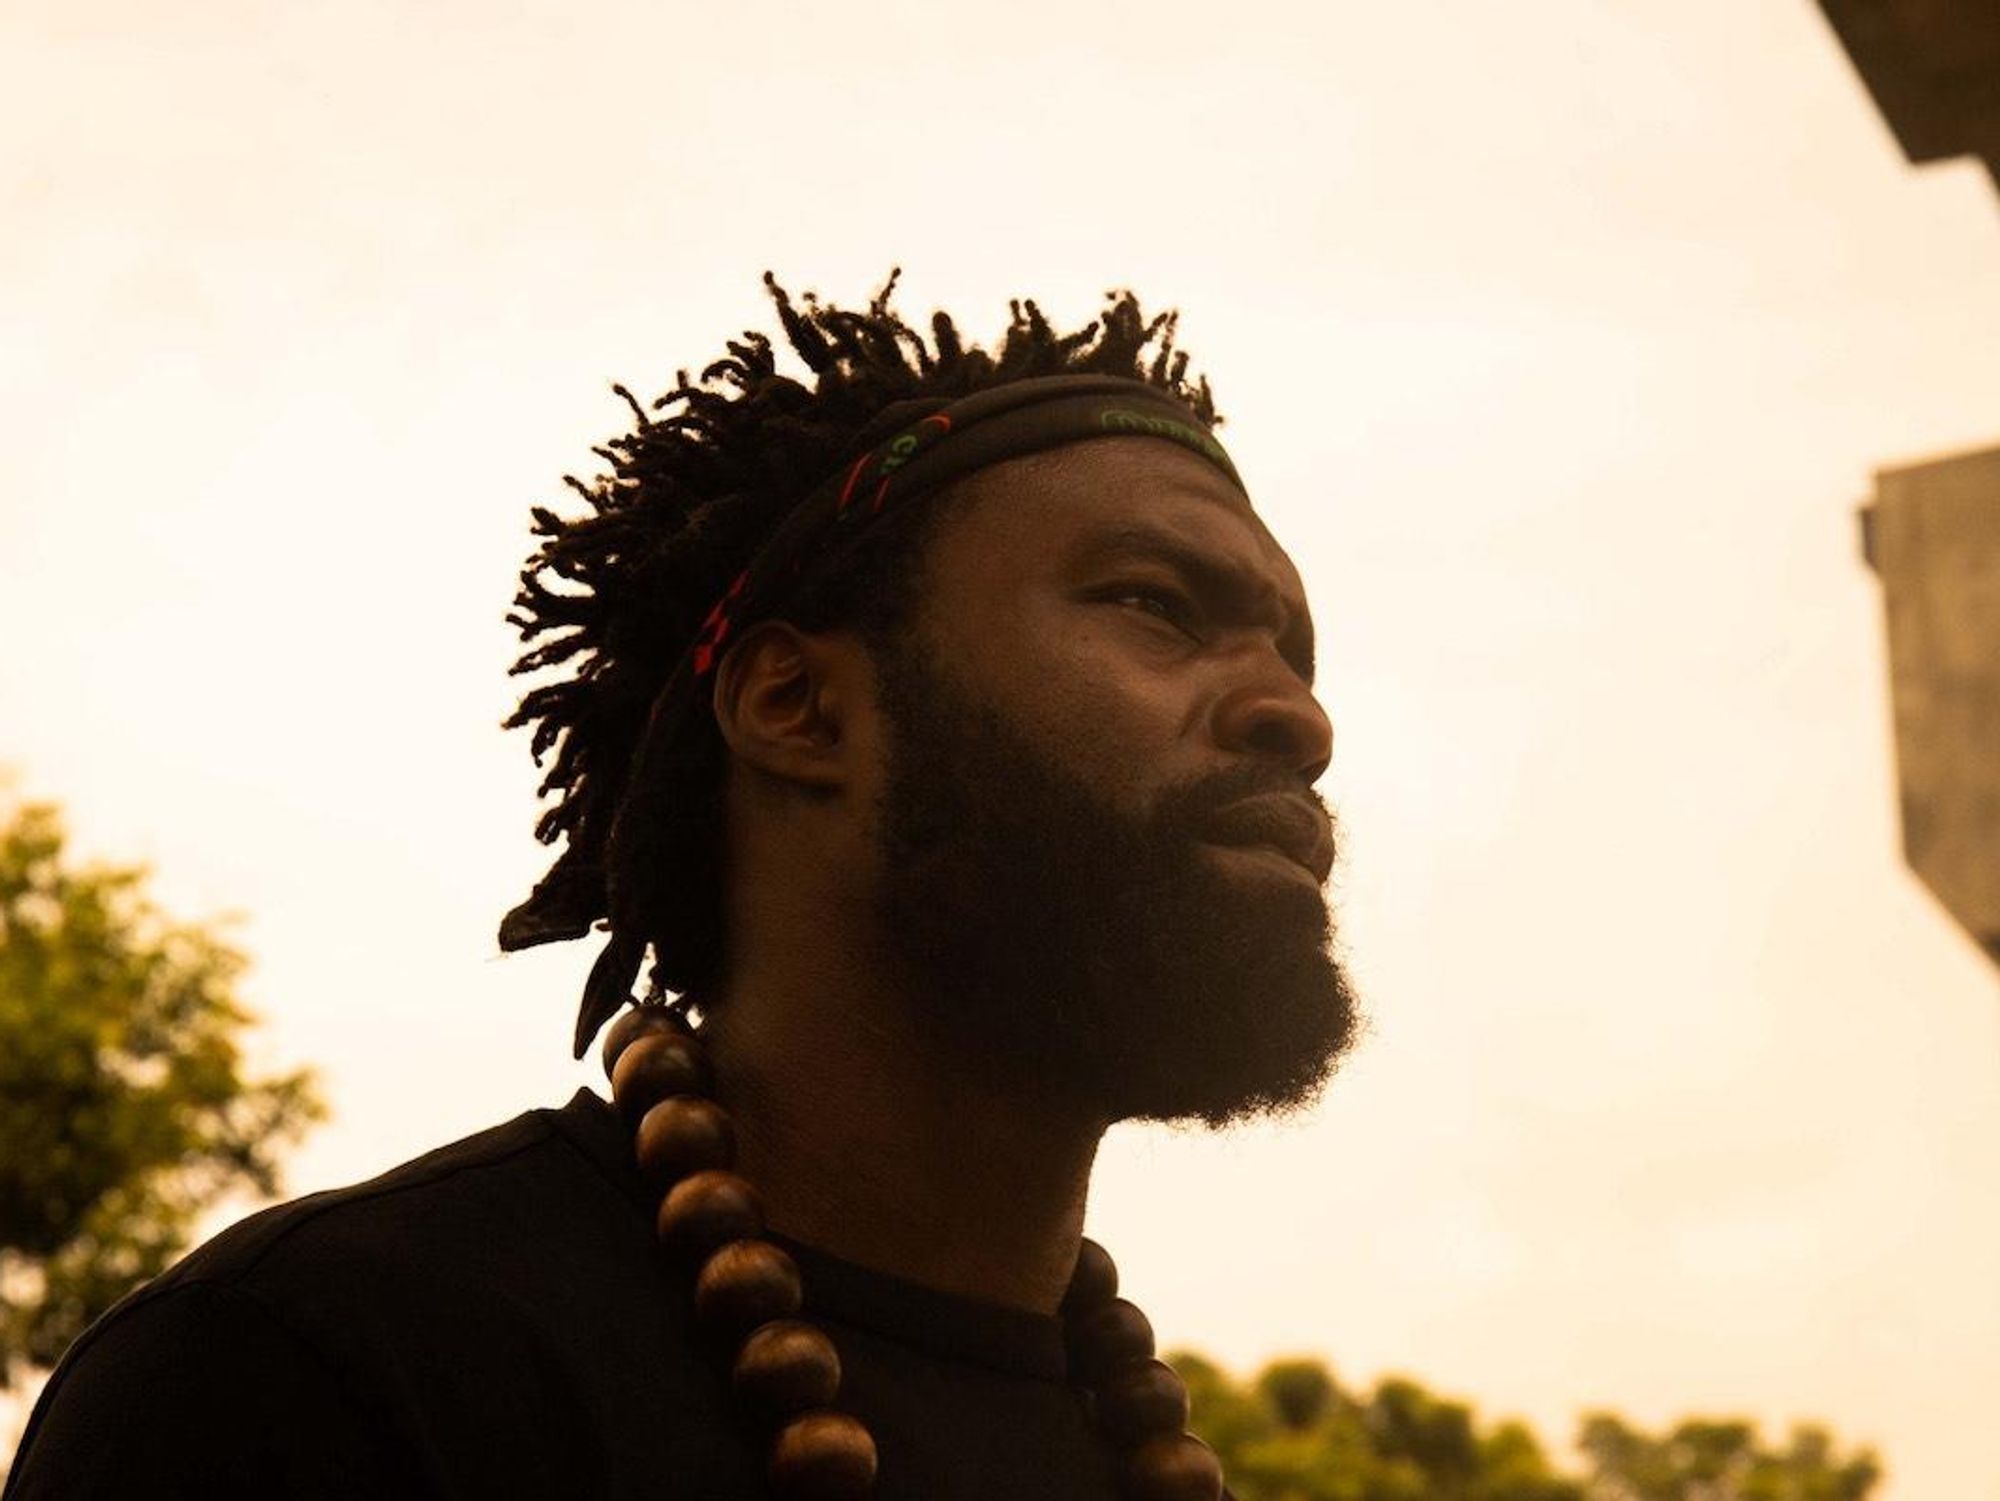 Profile picture of music video director Meji Alabi. He wears a bandana on his forehead and large bead necklace over black t-shirt.